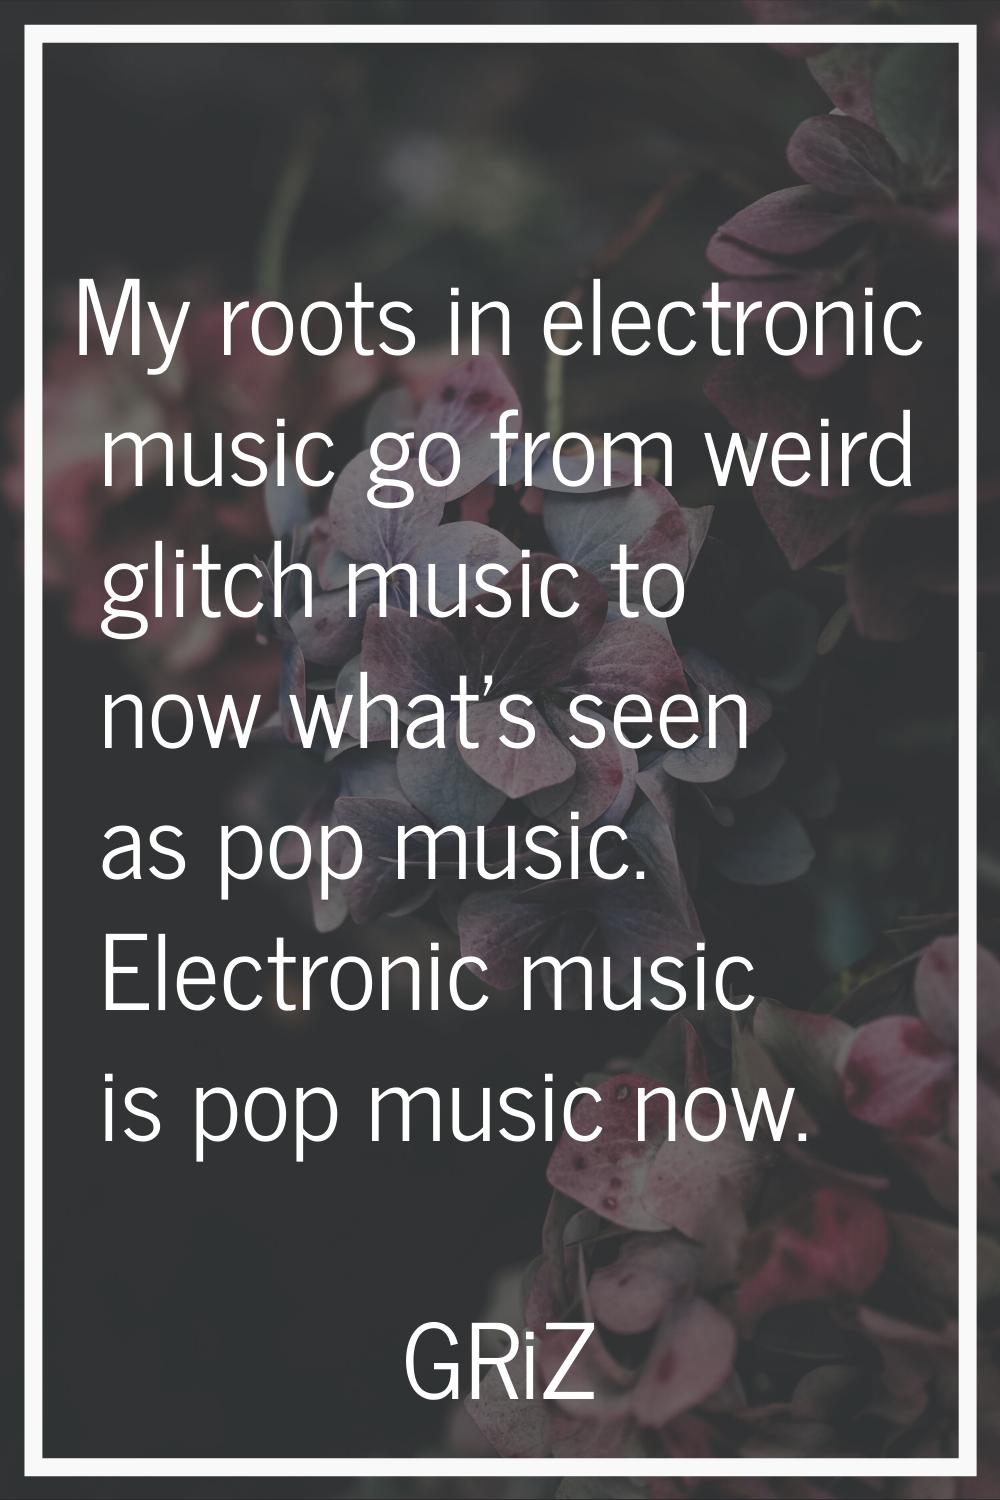 My roots in electronic music go from weird glitch music to now what's seen as pop music. Electronic